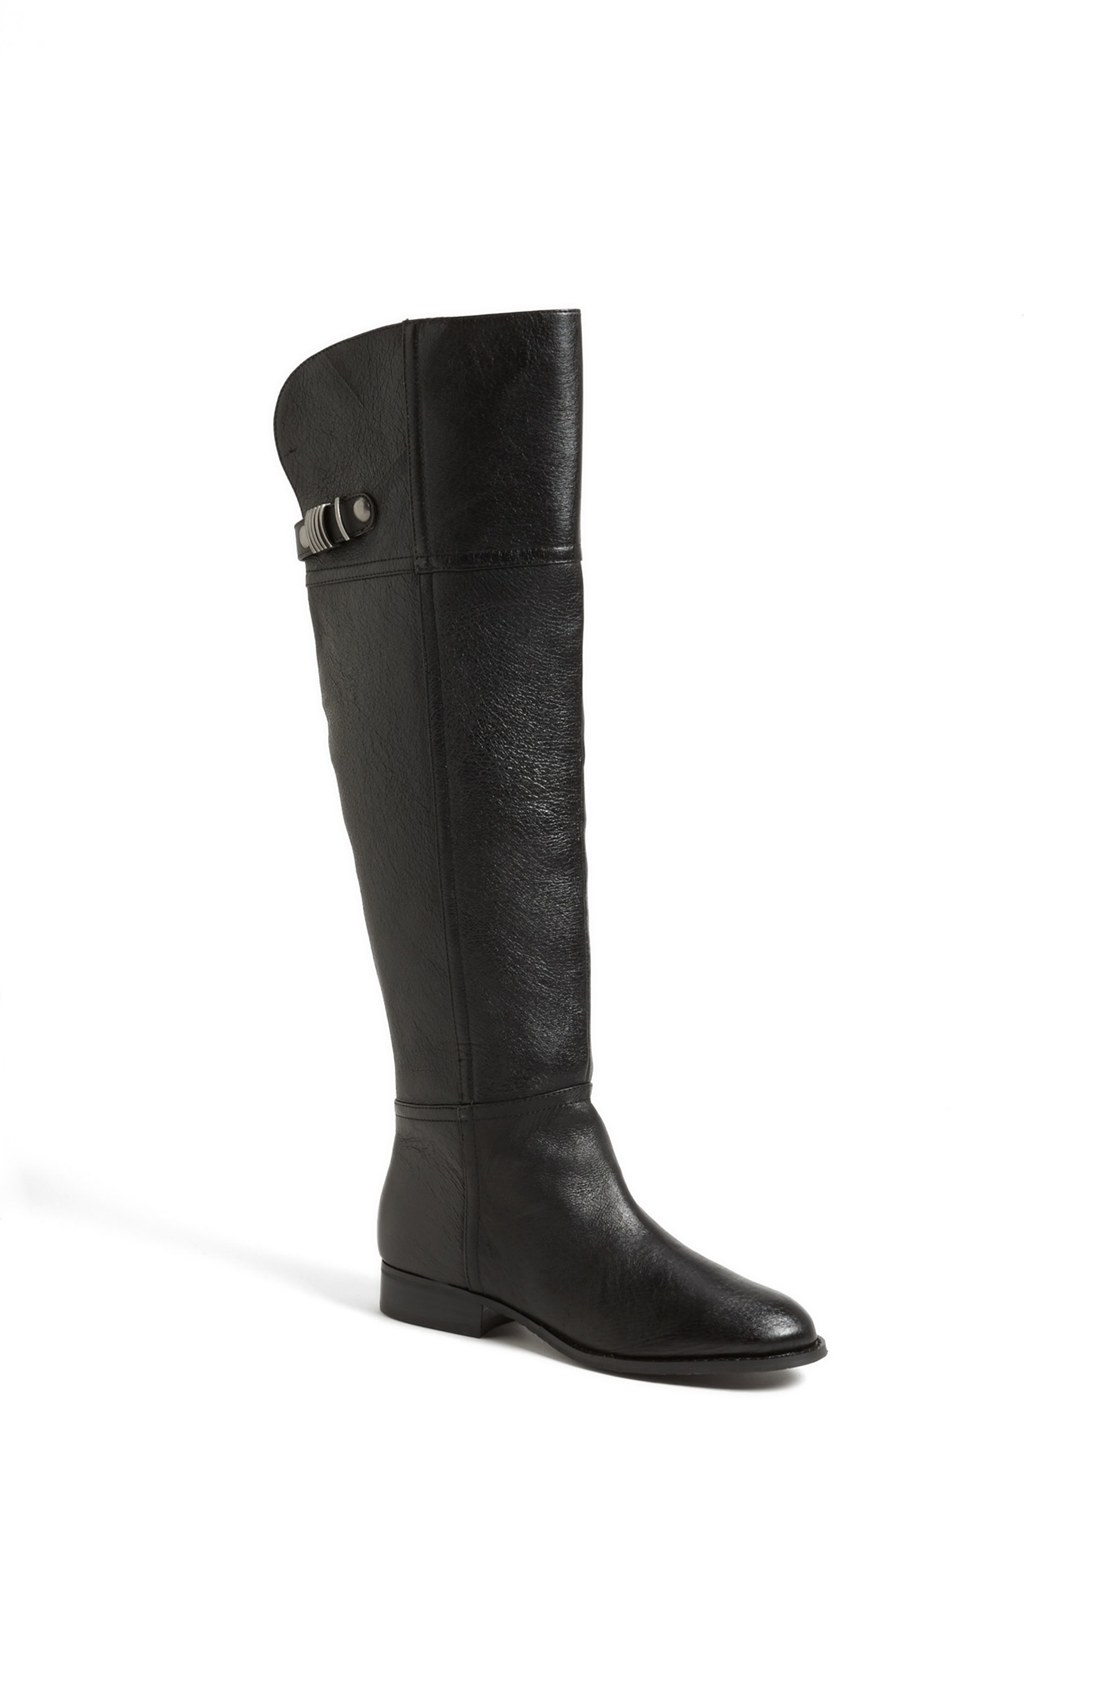 Chinese Laundry Flash Over The Knee Riding Boot in Black | Lyst